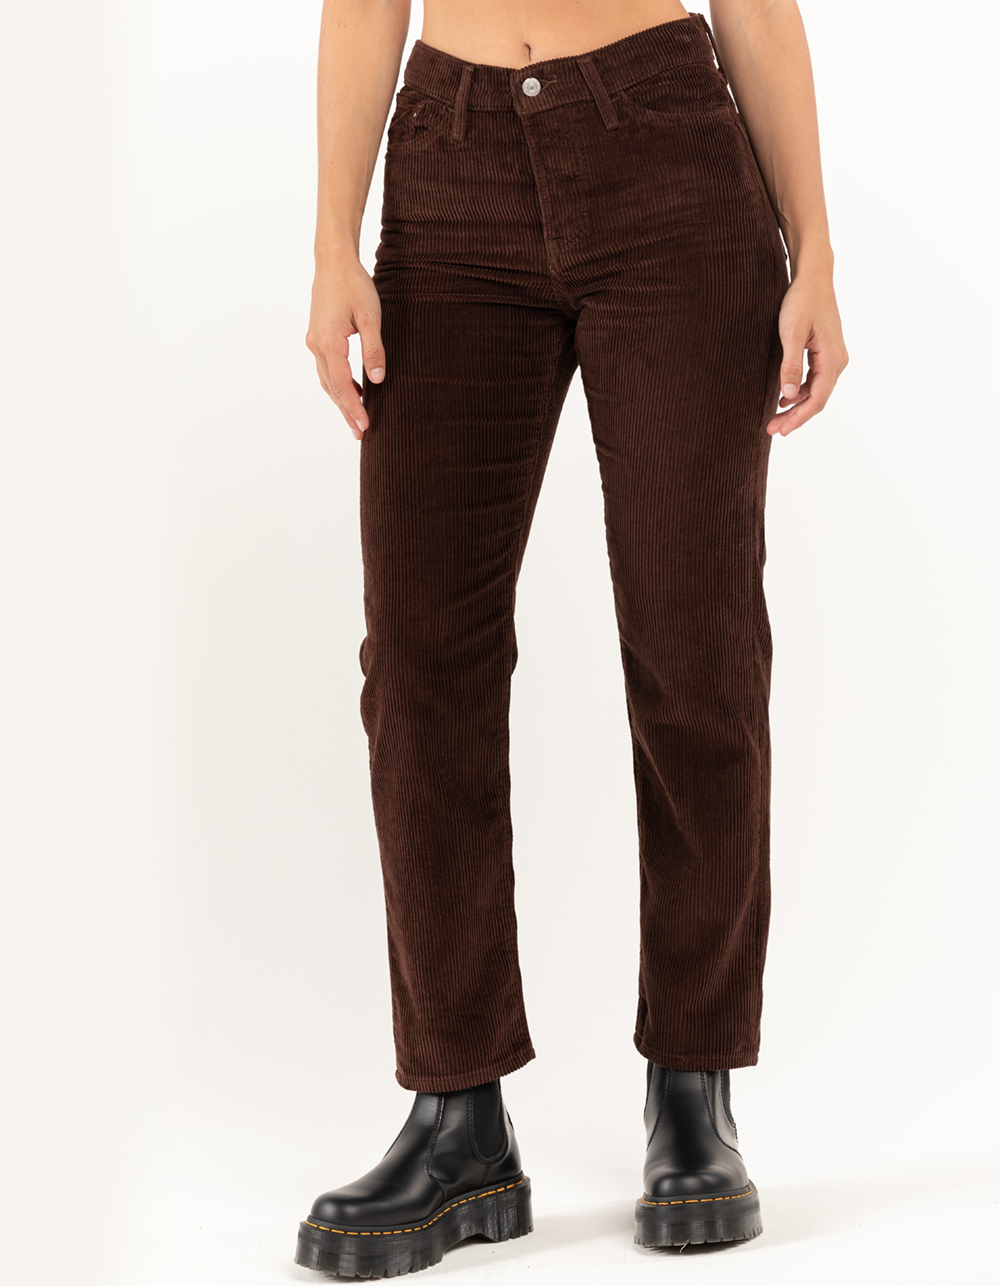 LEVI'S Wedgie Straight Womens Cord Pants - Chicory Coffee - COFFEE | Tillys